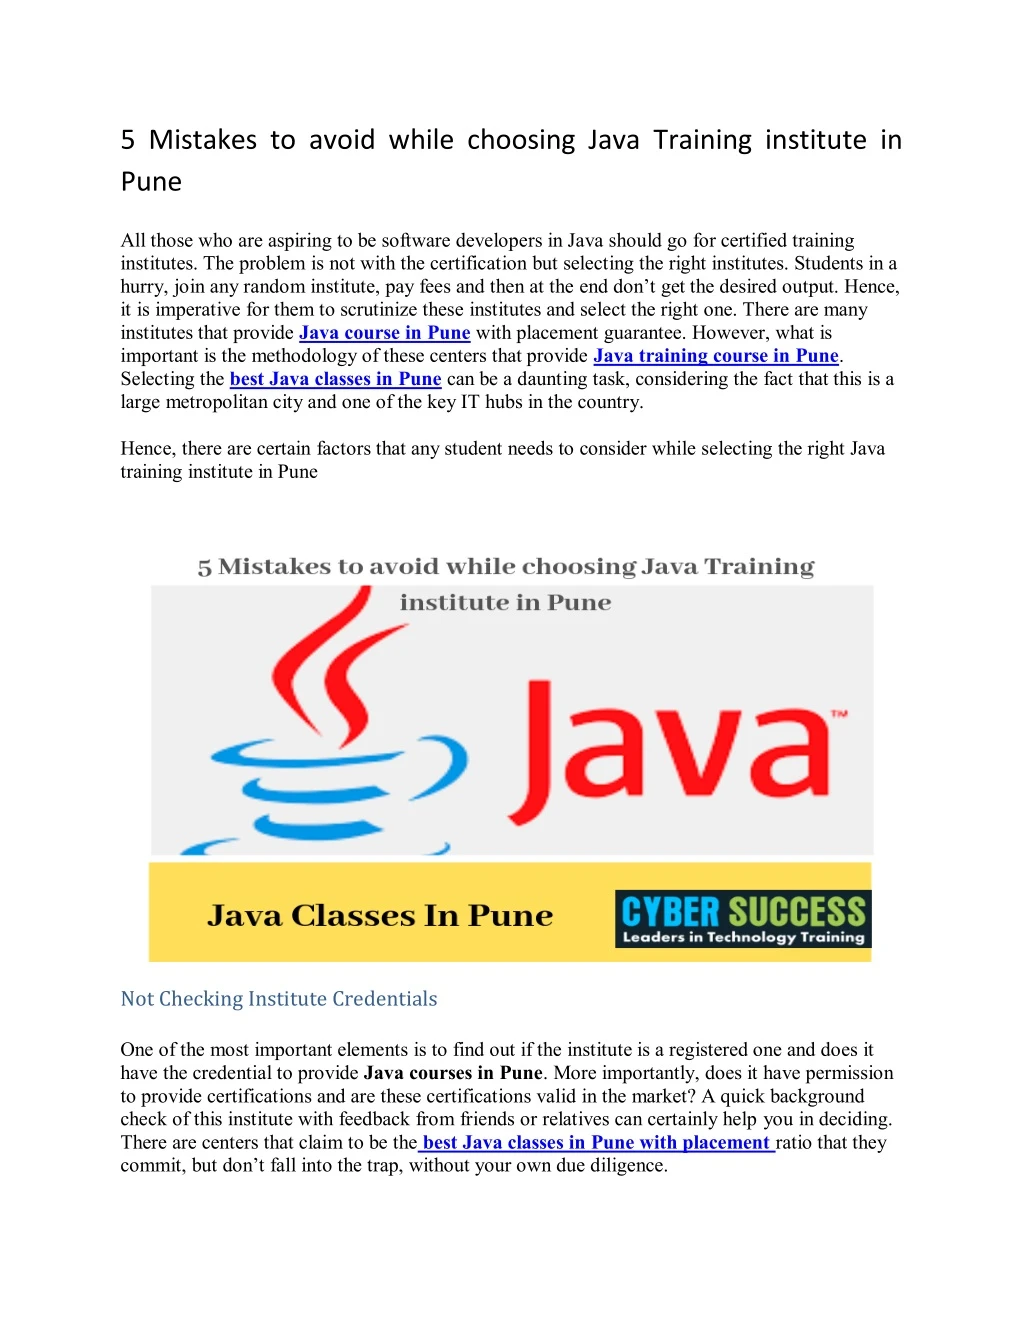 5 mistakes to avoid while choosing java training